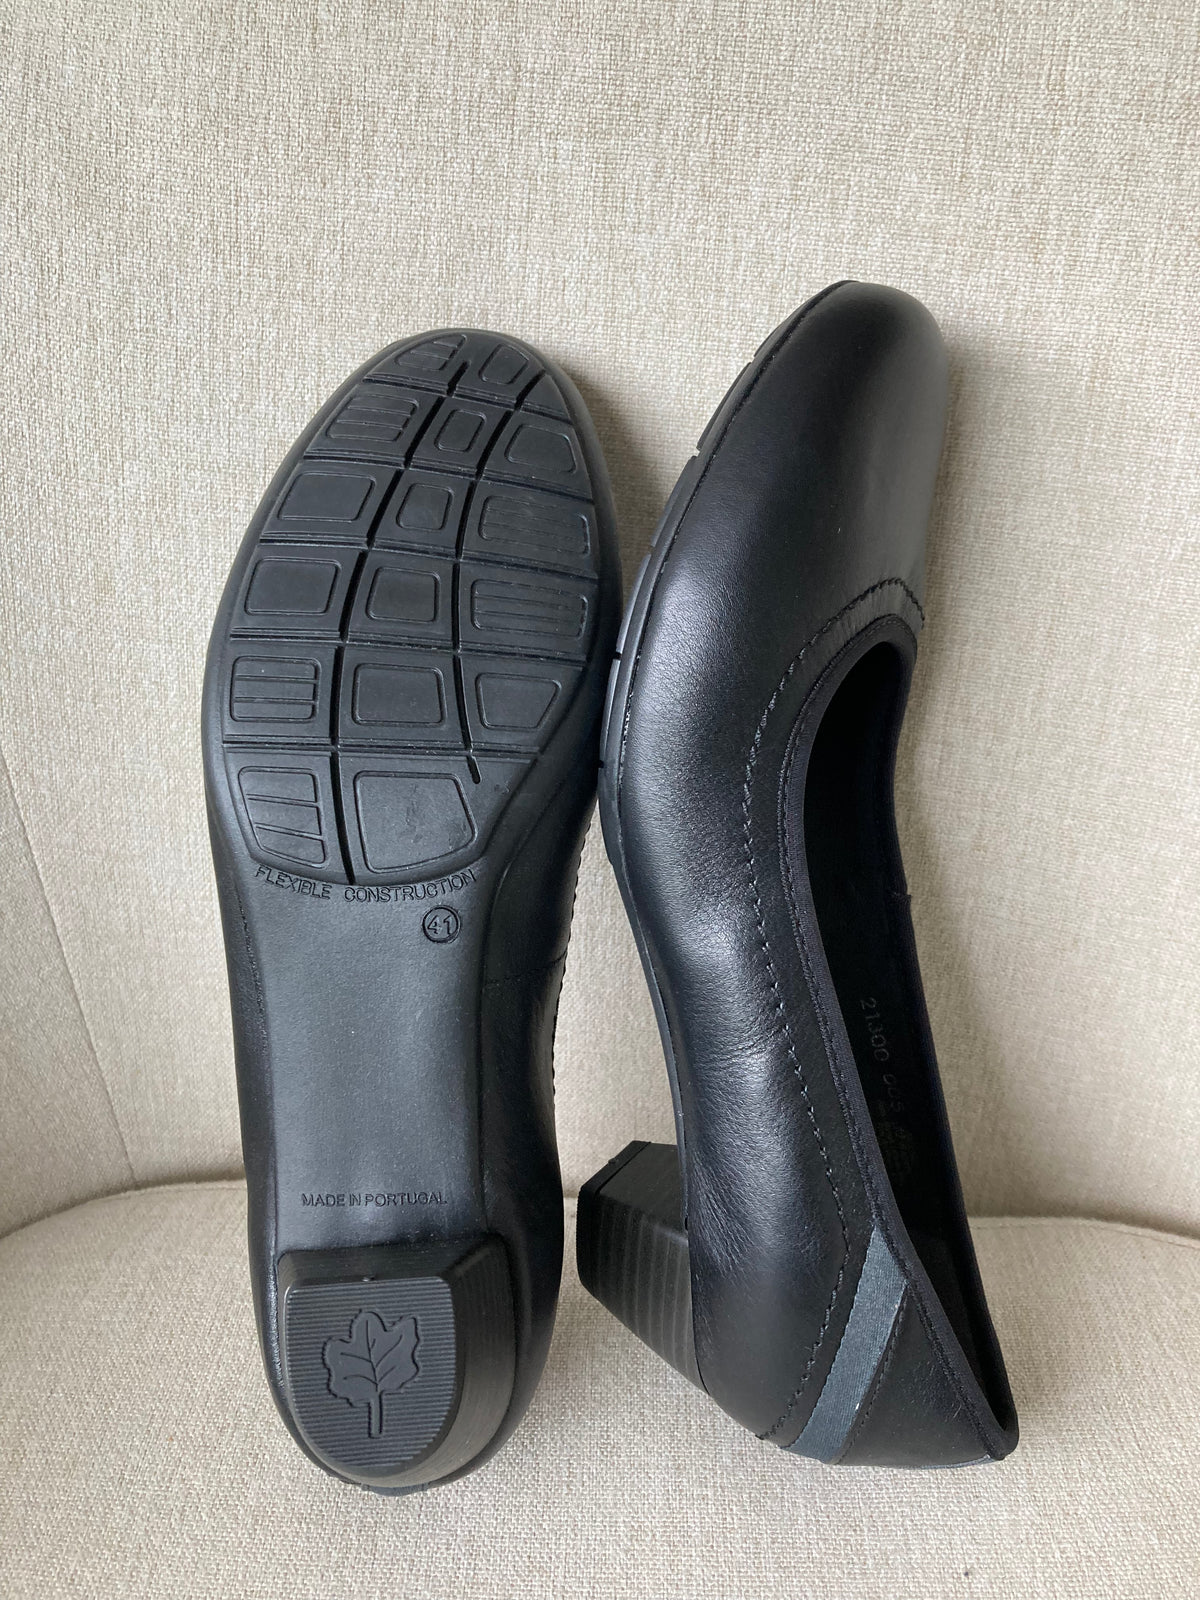 Black court shoes by AIRSOFT - Size 7